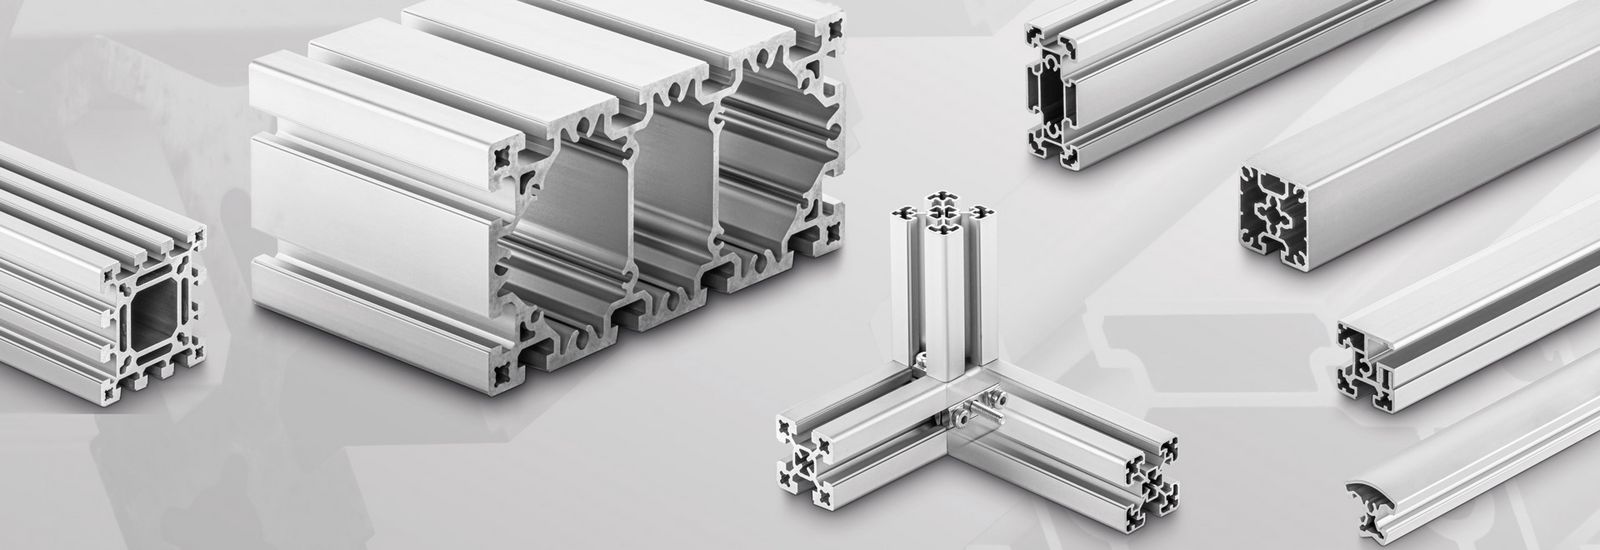 Aluminium profiles from RK Rose+Krieger – connecting profiles without the need for further machining